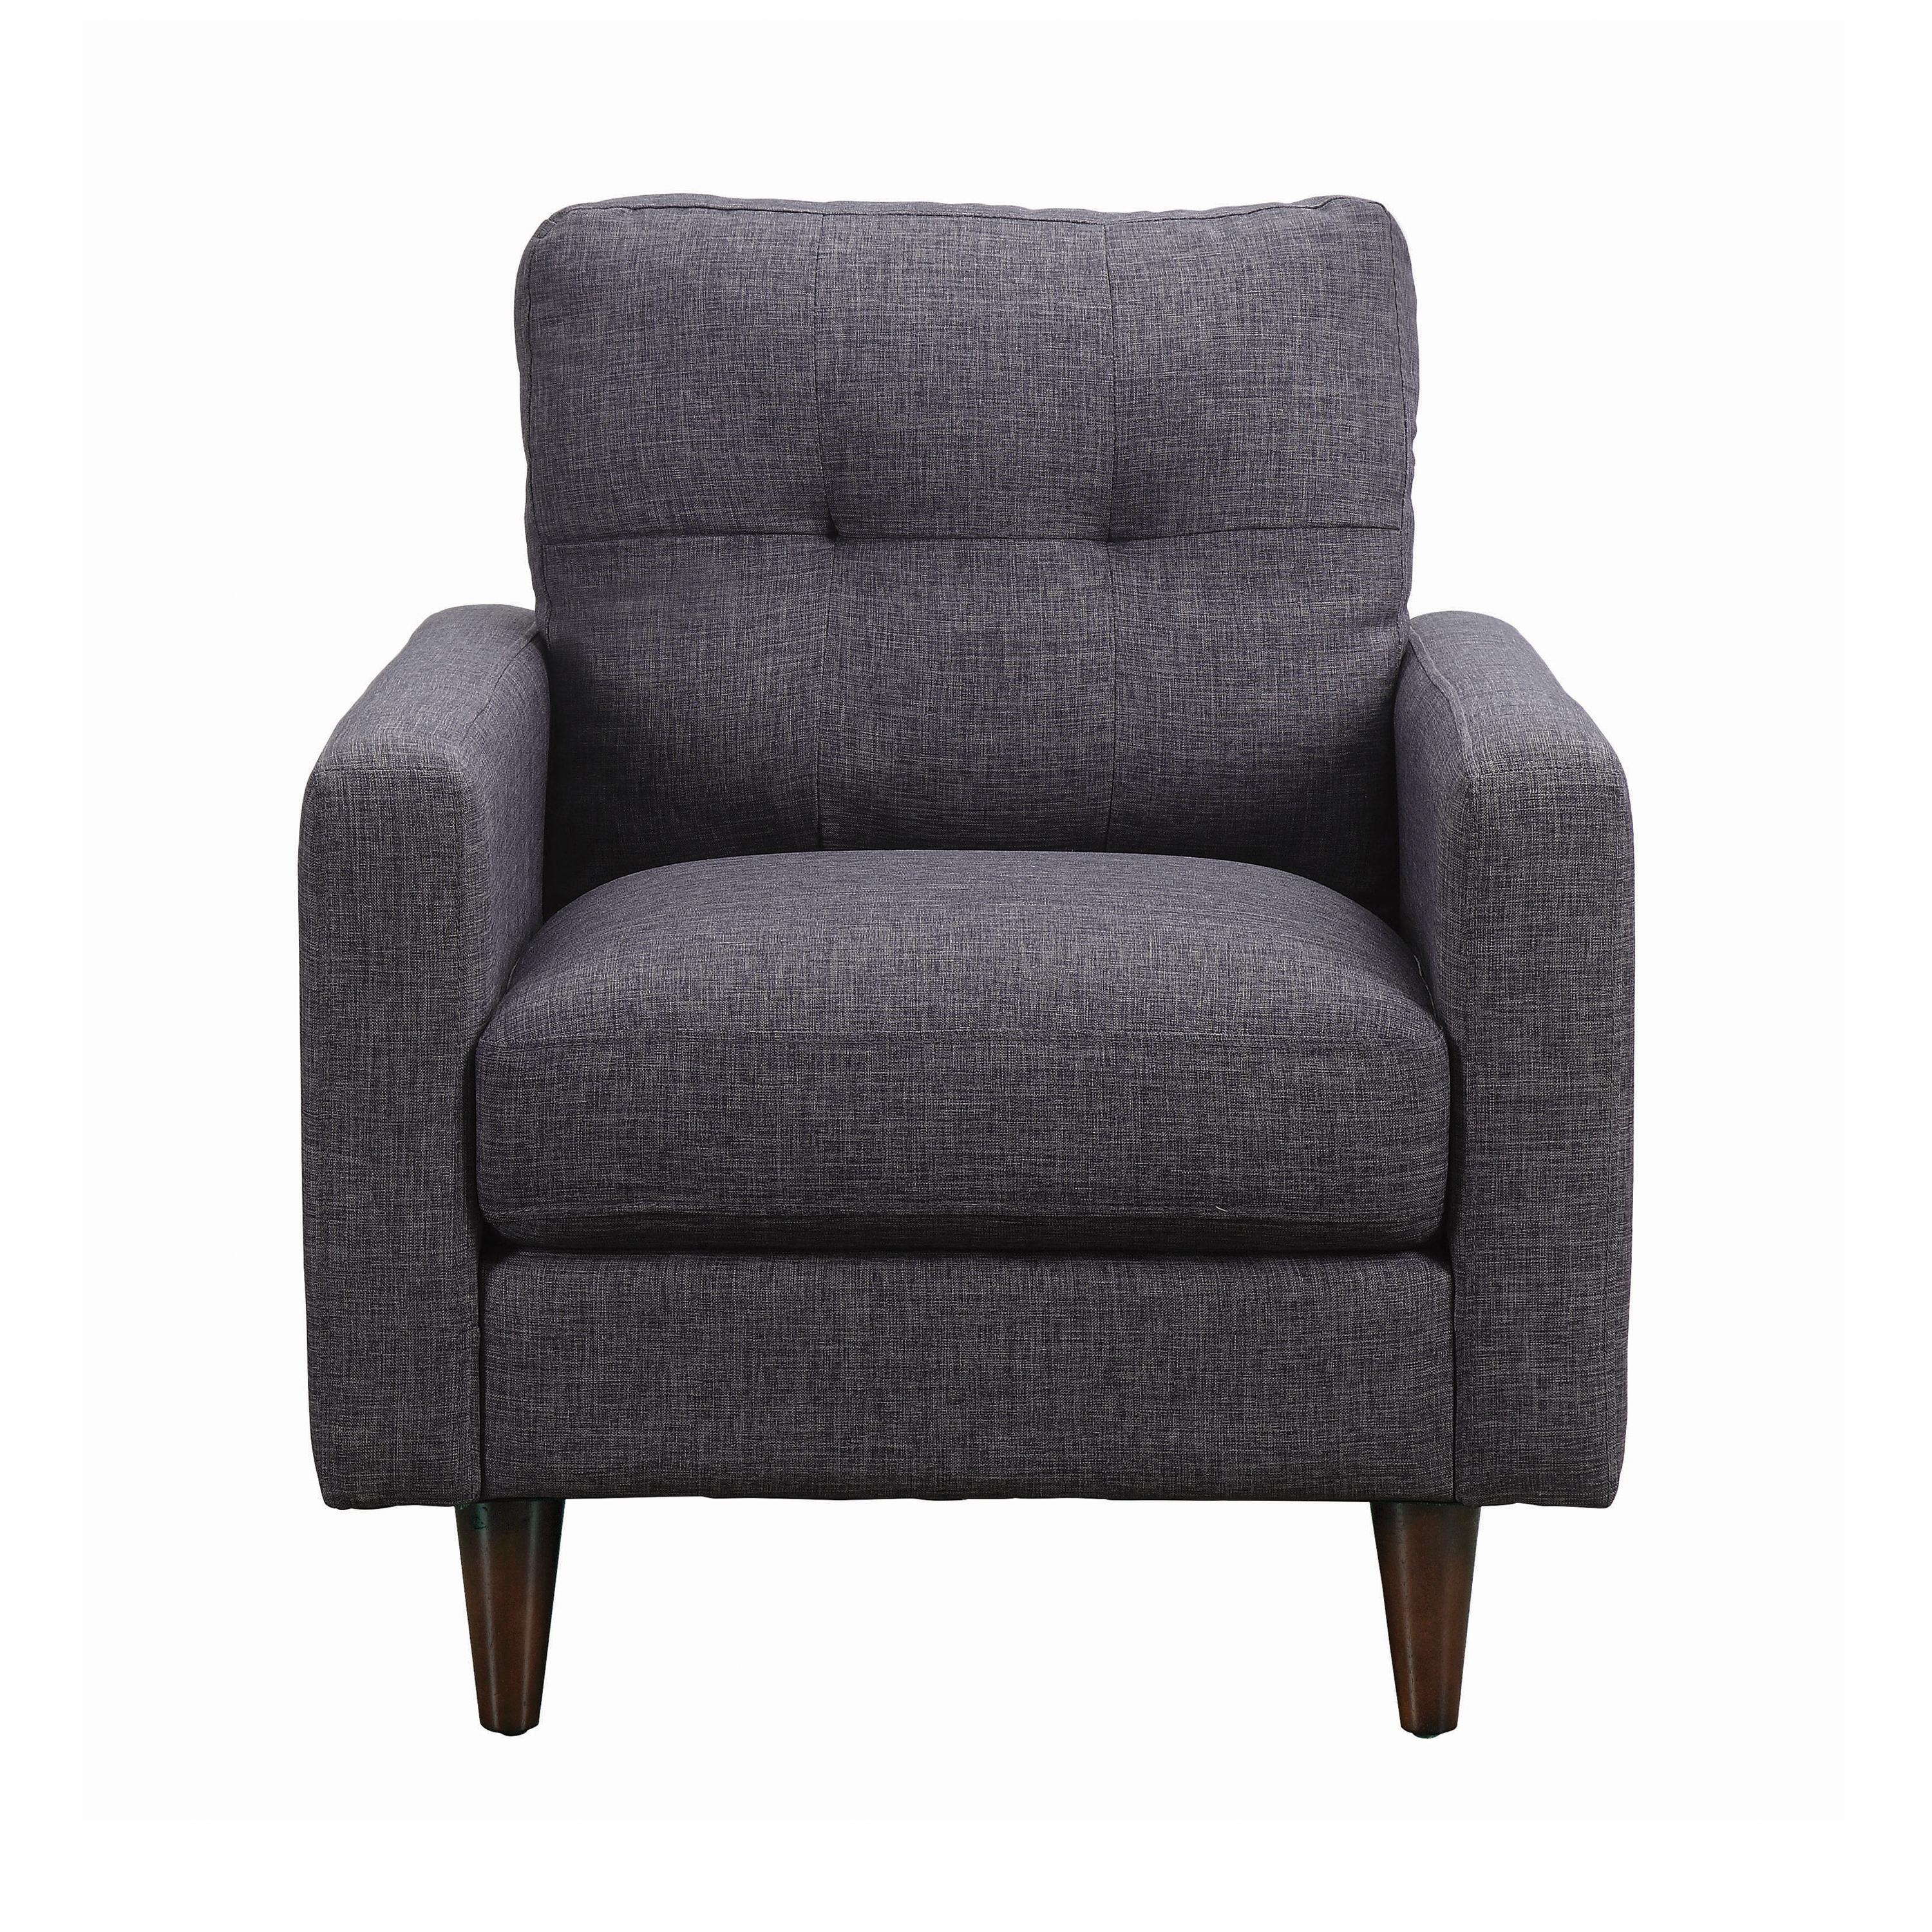 Transitional Arm Chair 552003 Watsonville 552003 in Gray 